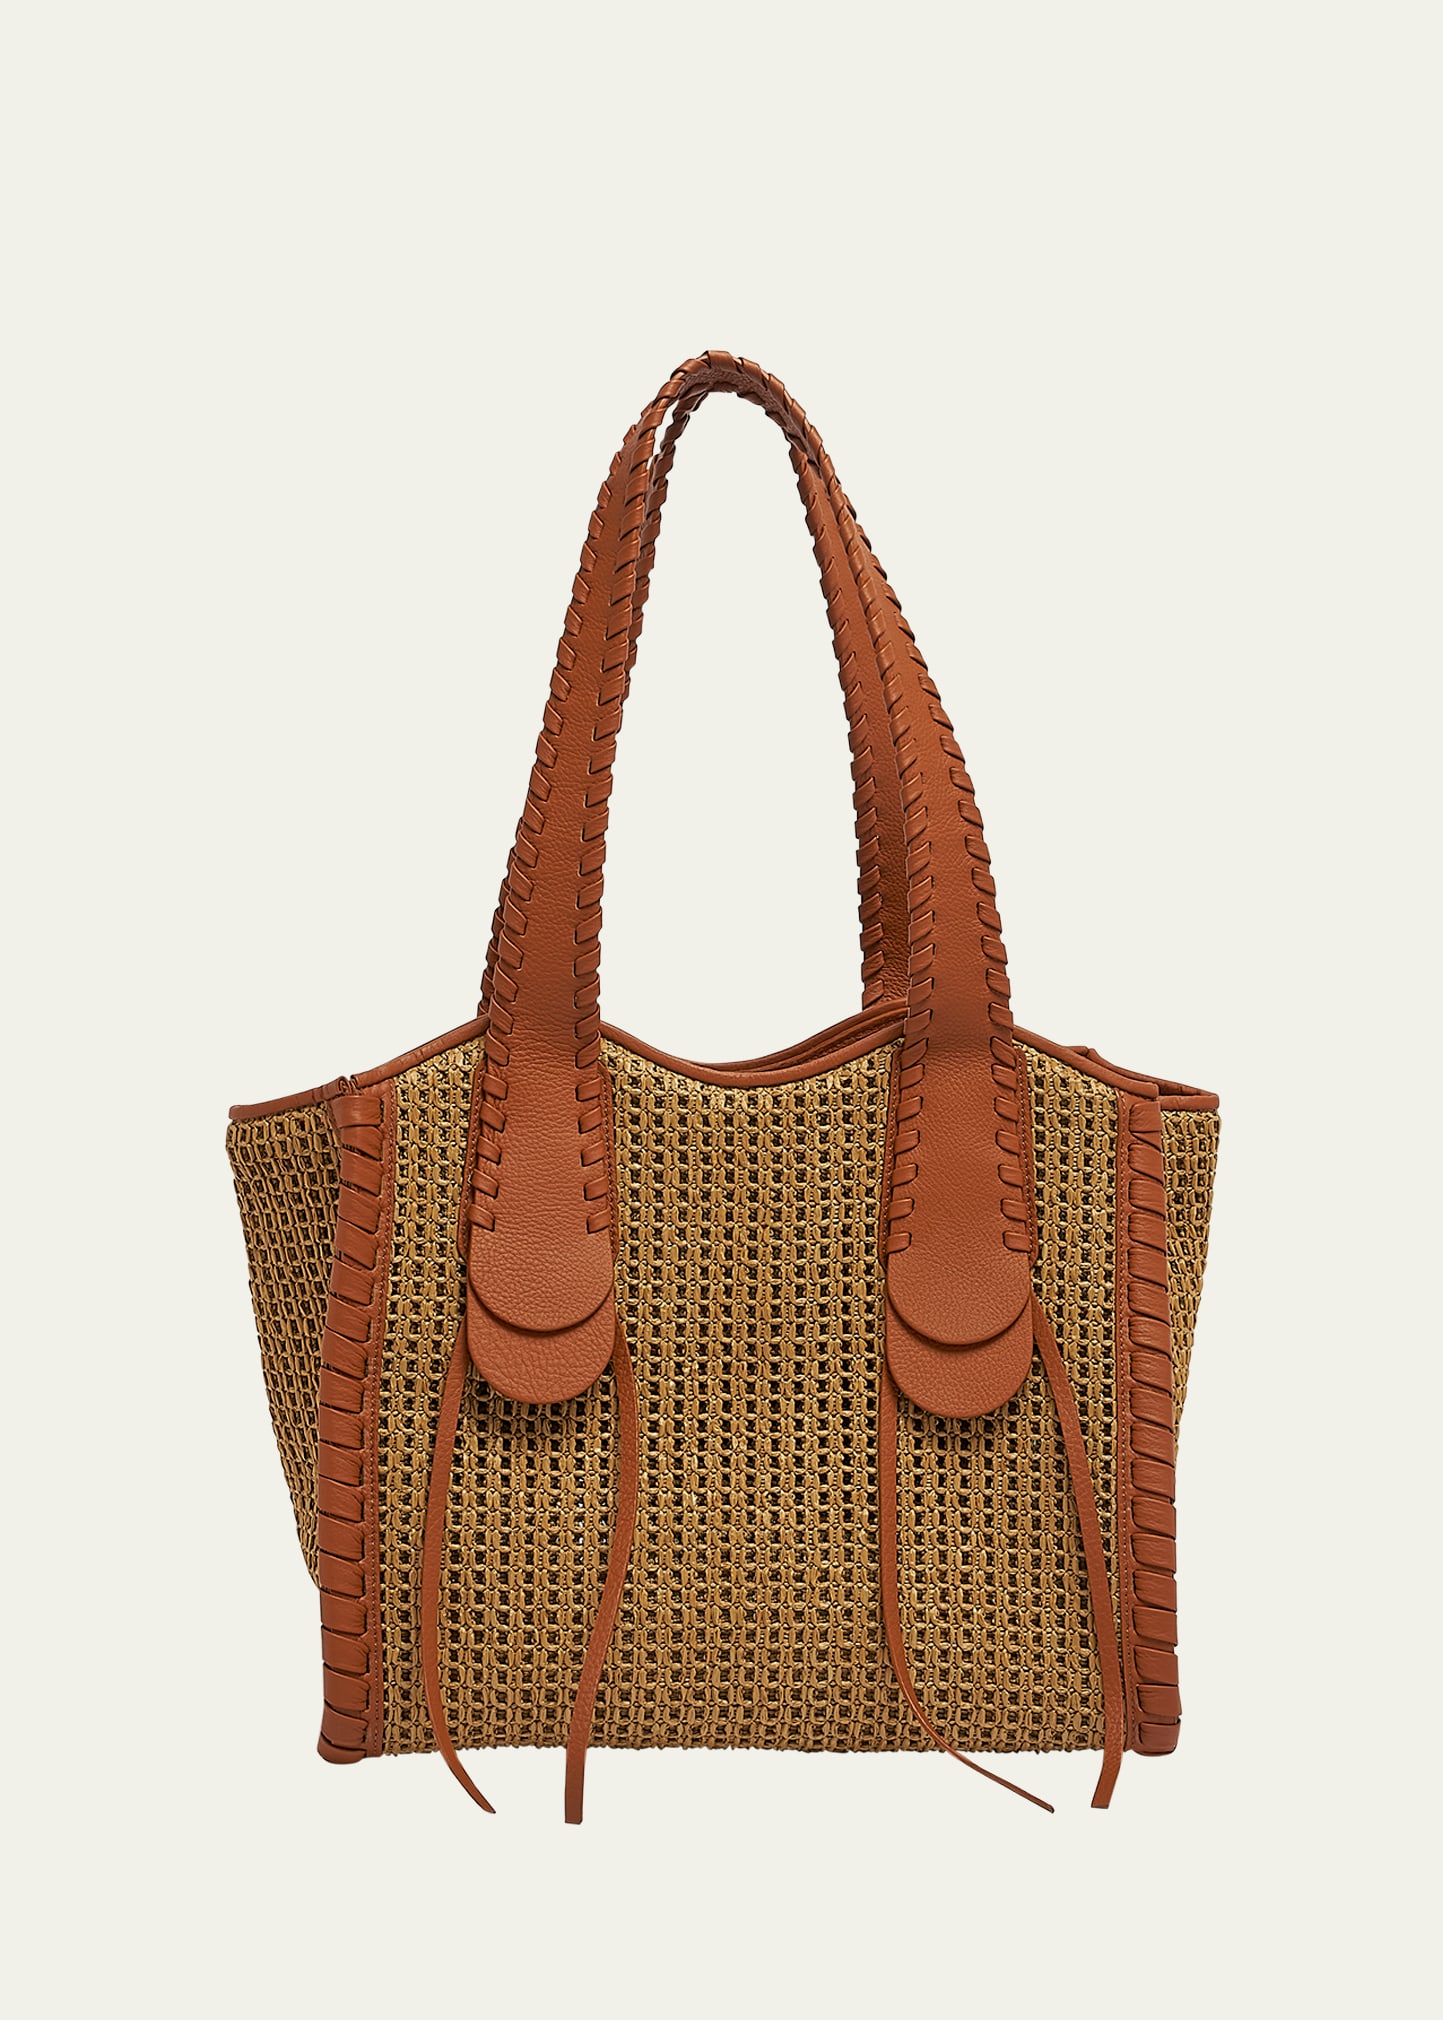 Monty Tote Bag in Raffia and Calfskin Leather